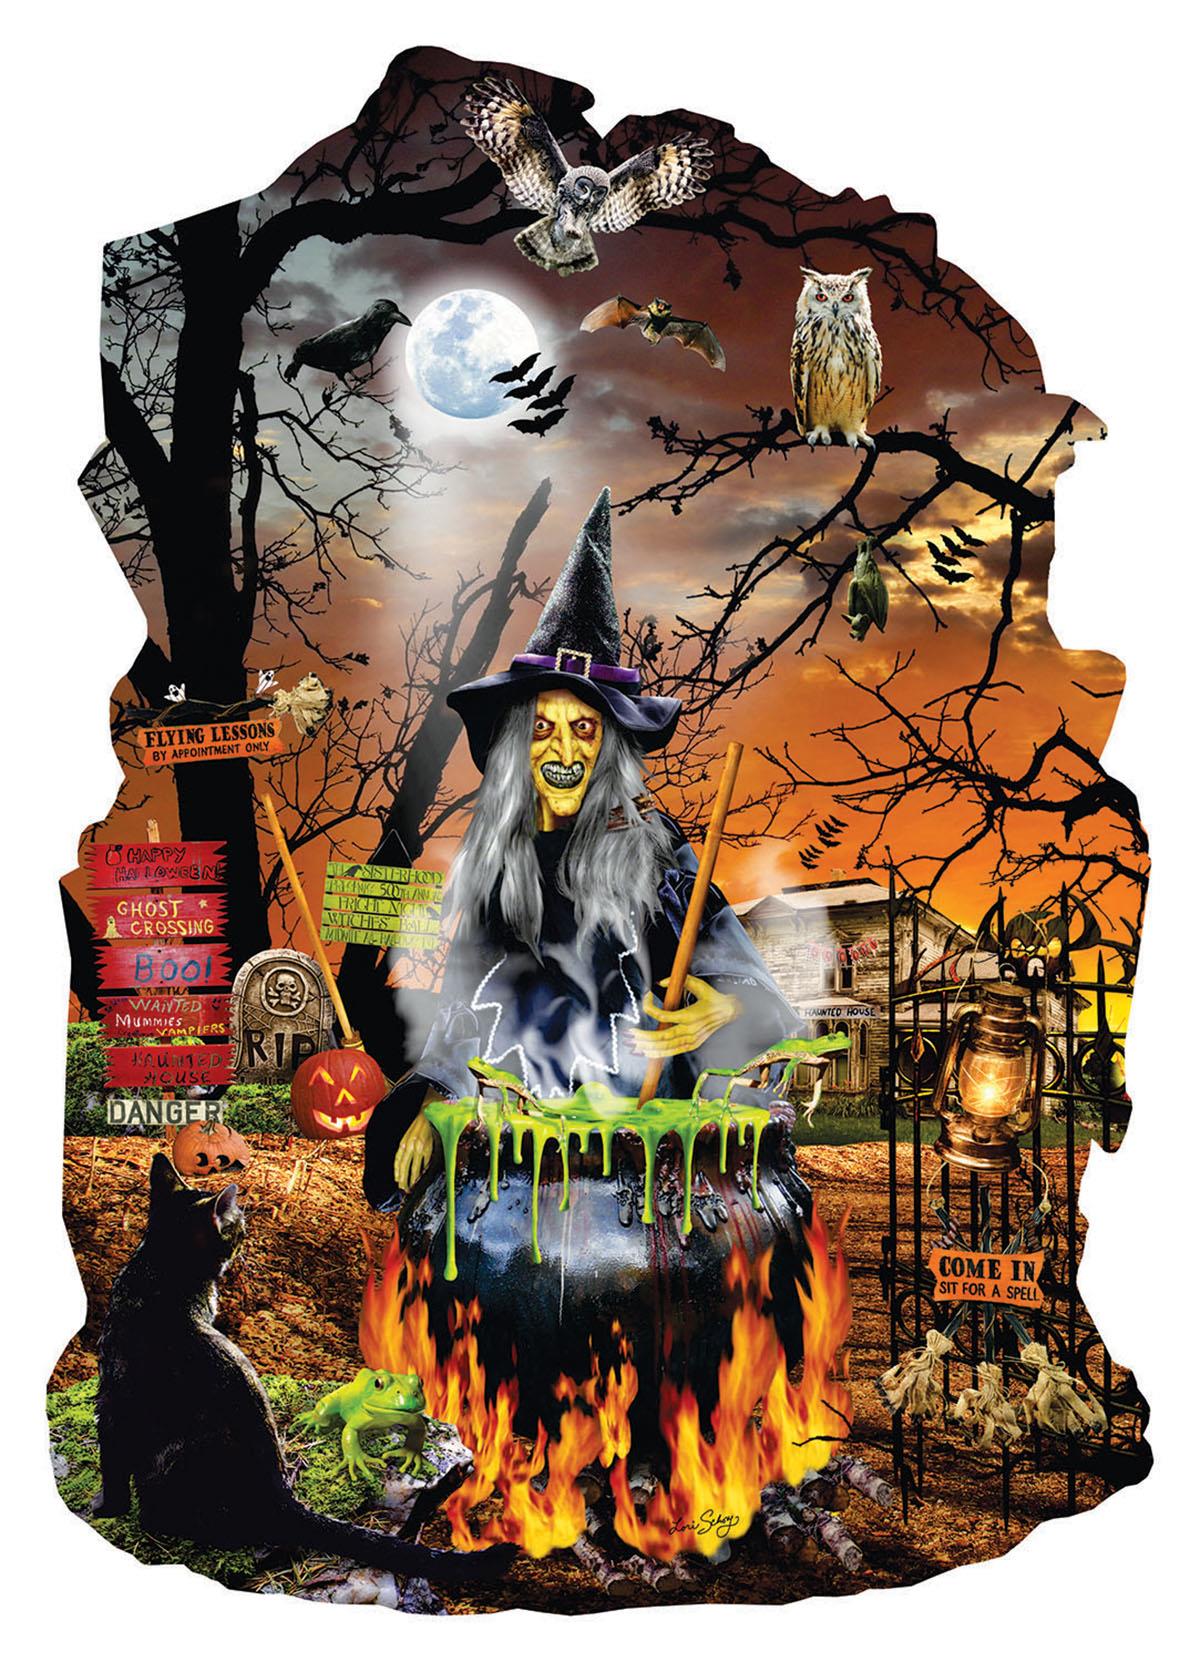 Sunsout Witch's Brew - Lori Schory Shaped Jigsaw Puzzle (1000 Pieces)